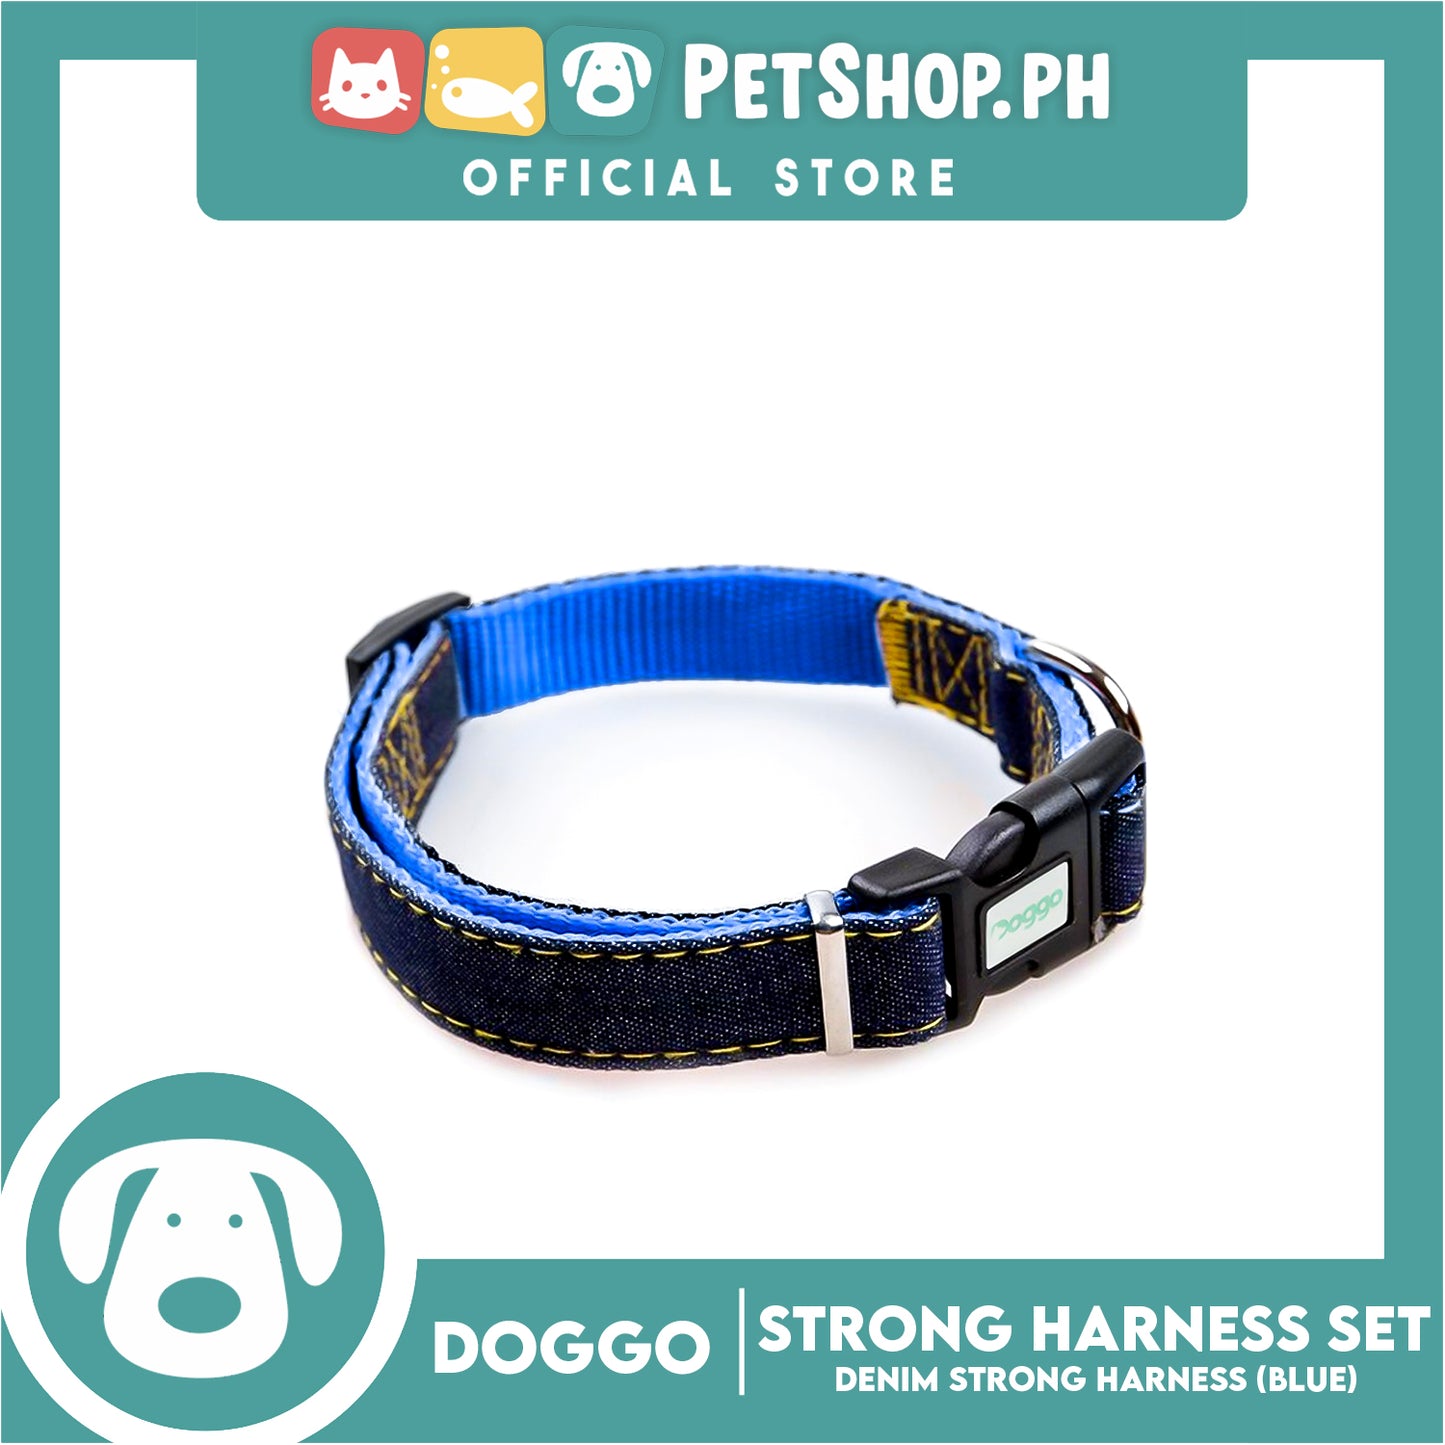 Doggo Strong Harness Set Denim Design Large (Blue) Harness, Leash and Collar for Your Dog